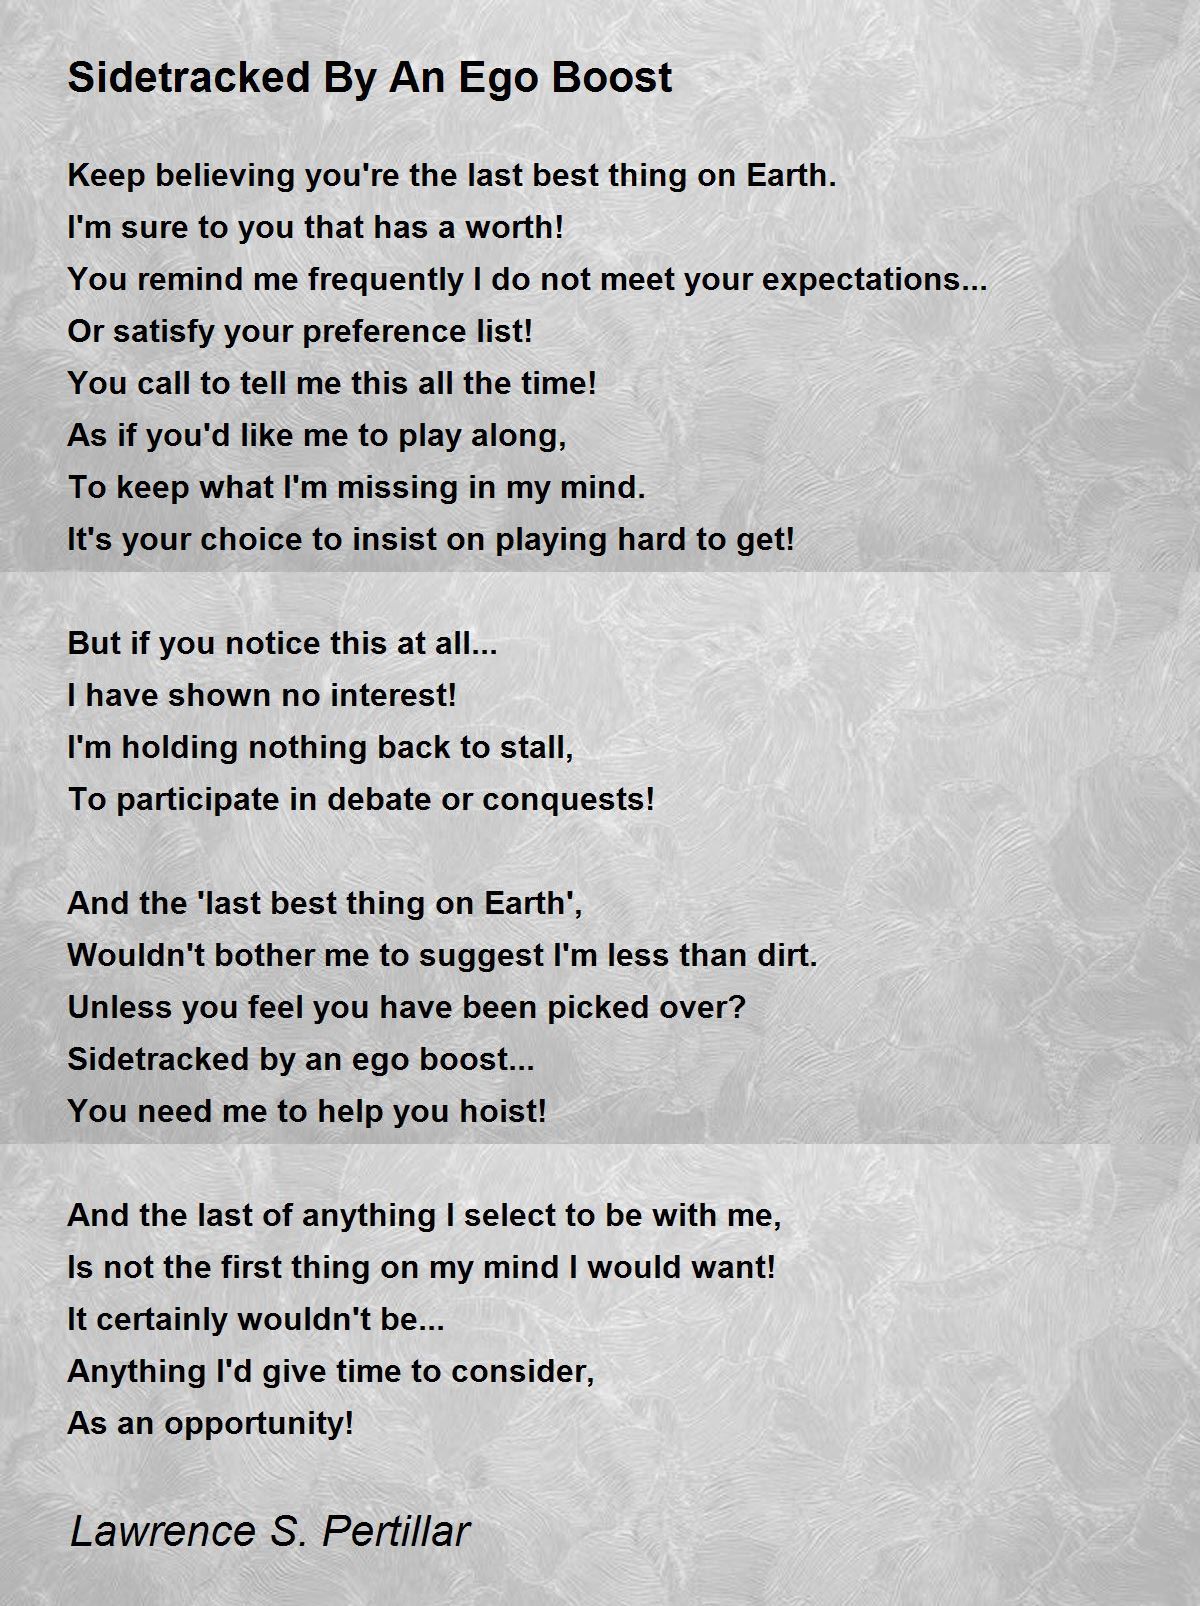 Sidetracked By An Ego Boost - Sidetracked By An Ego Boost Poem by Lawrence  S. Pertillar